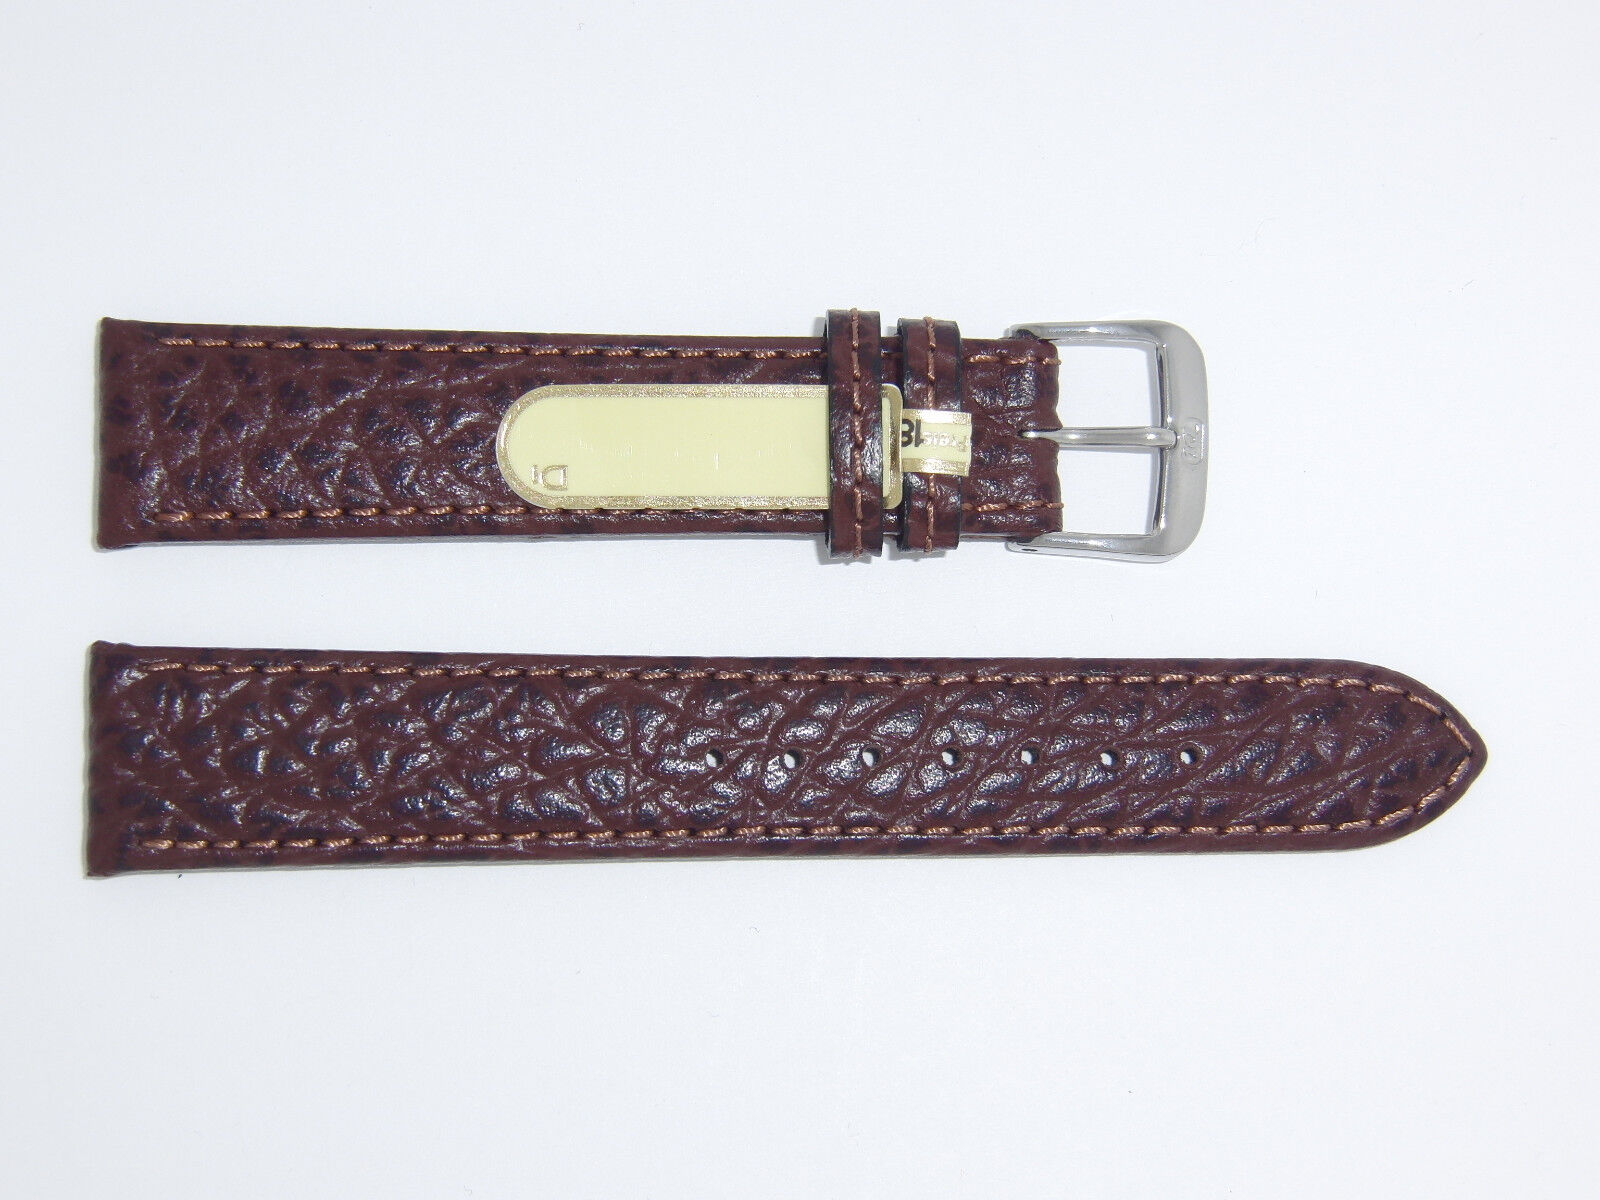 DI-Modell Genuine Calfskin Leather 18 mm D' BROWN Watch Band "CAMEL"